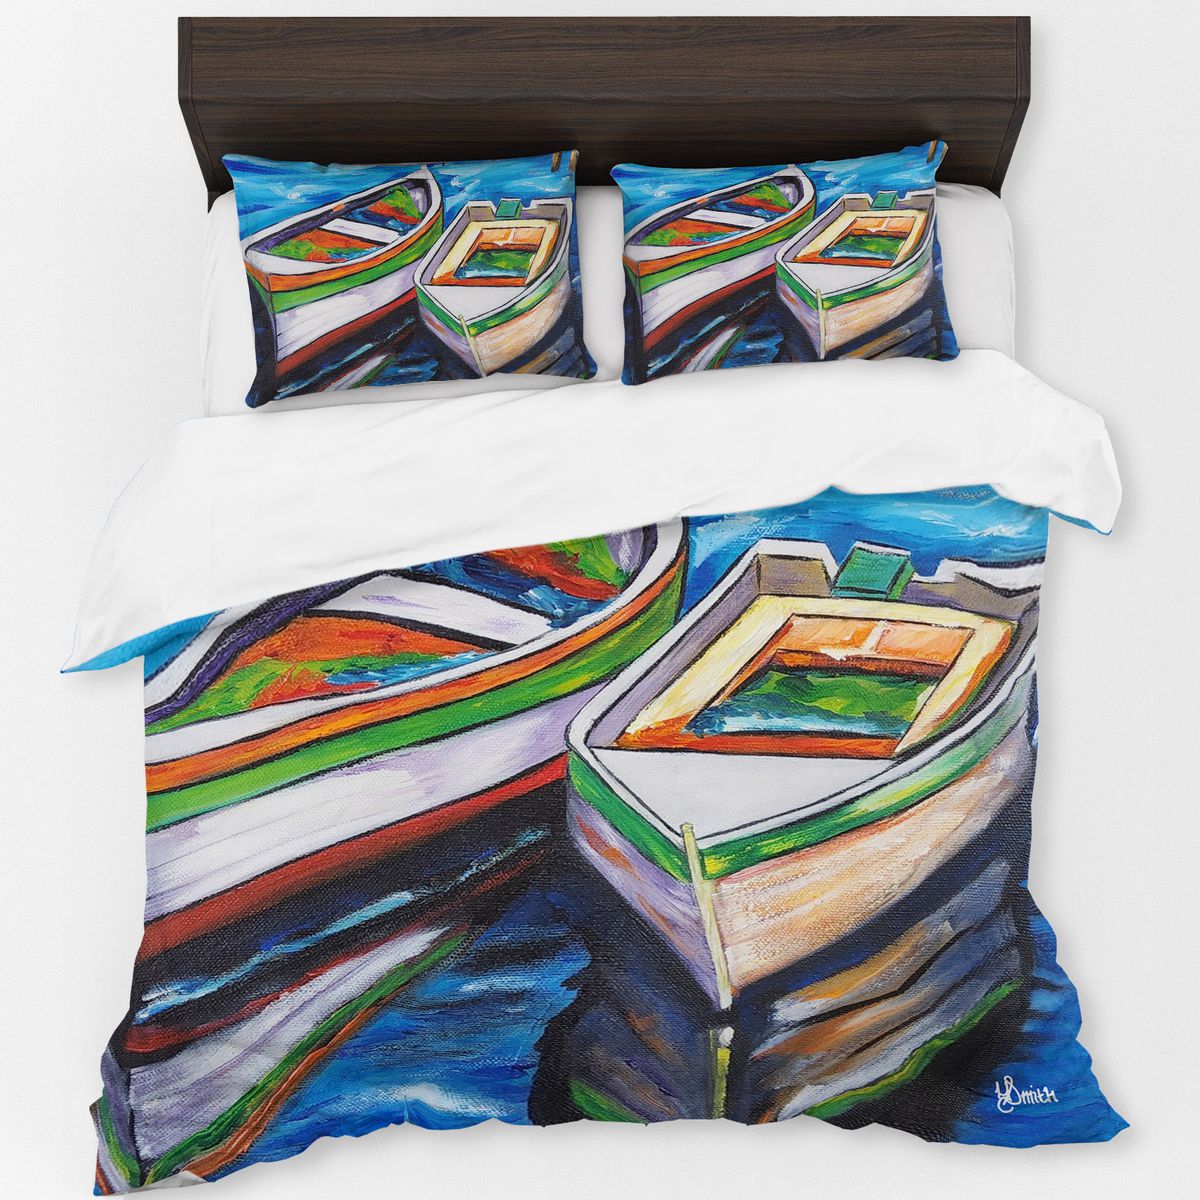 Two Boats By Yolande Smith Duvet Cover Set